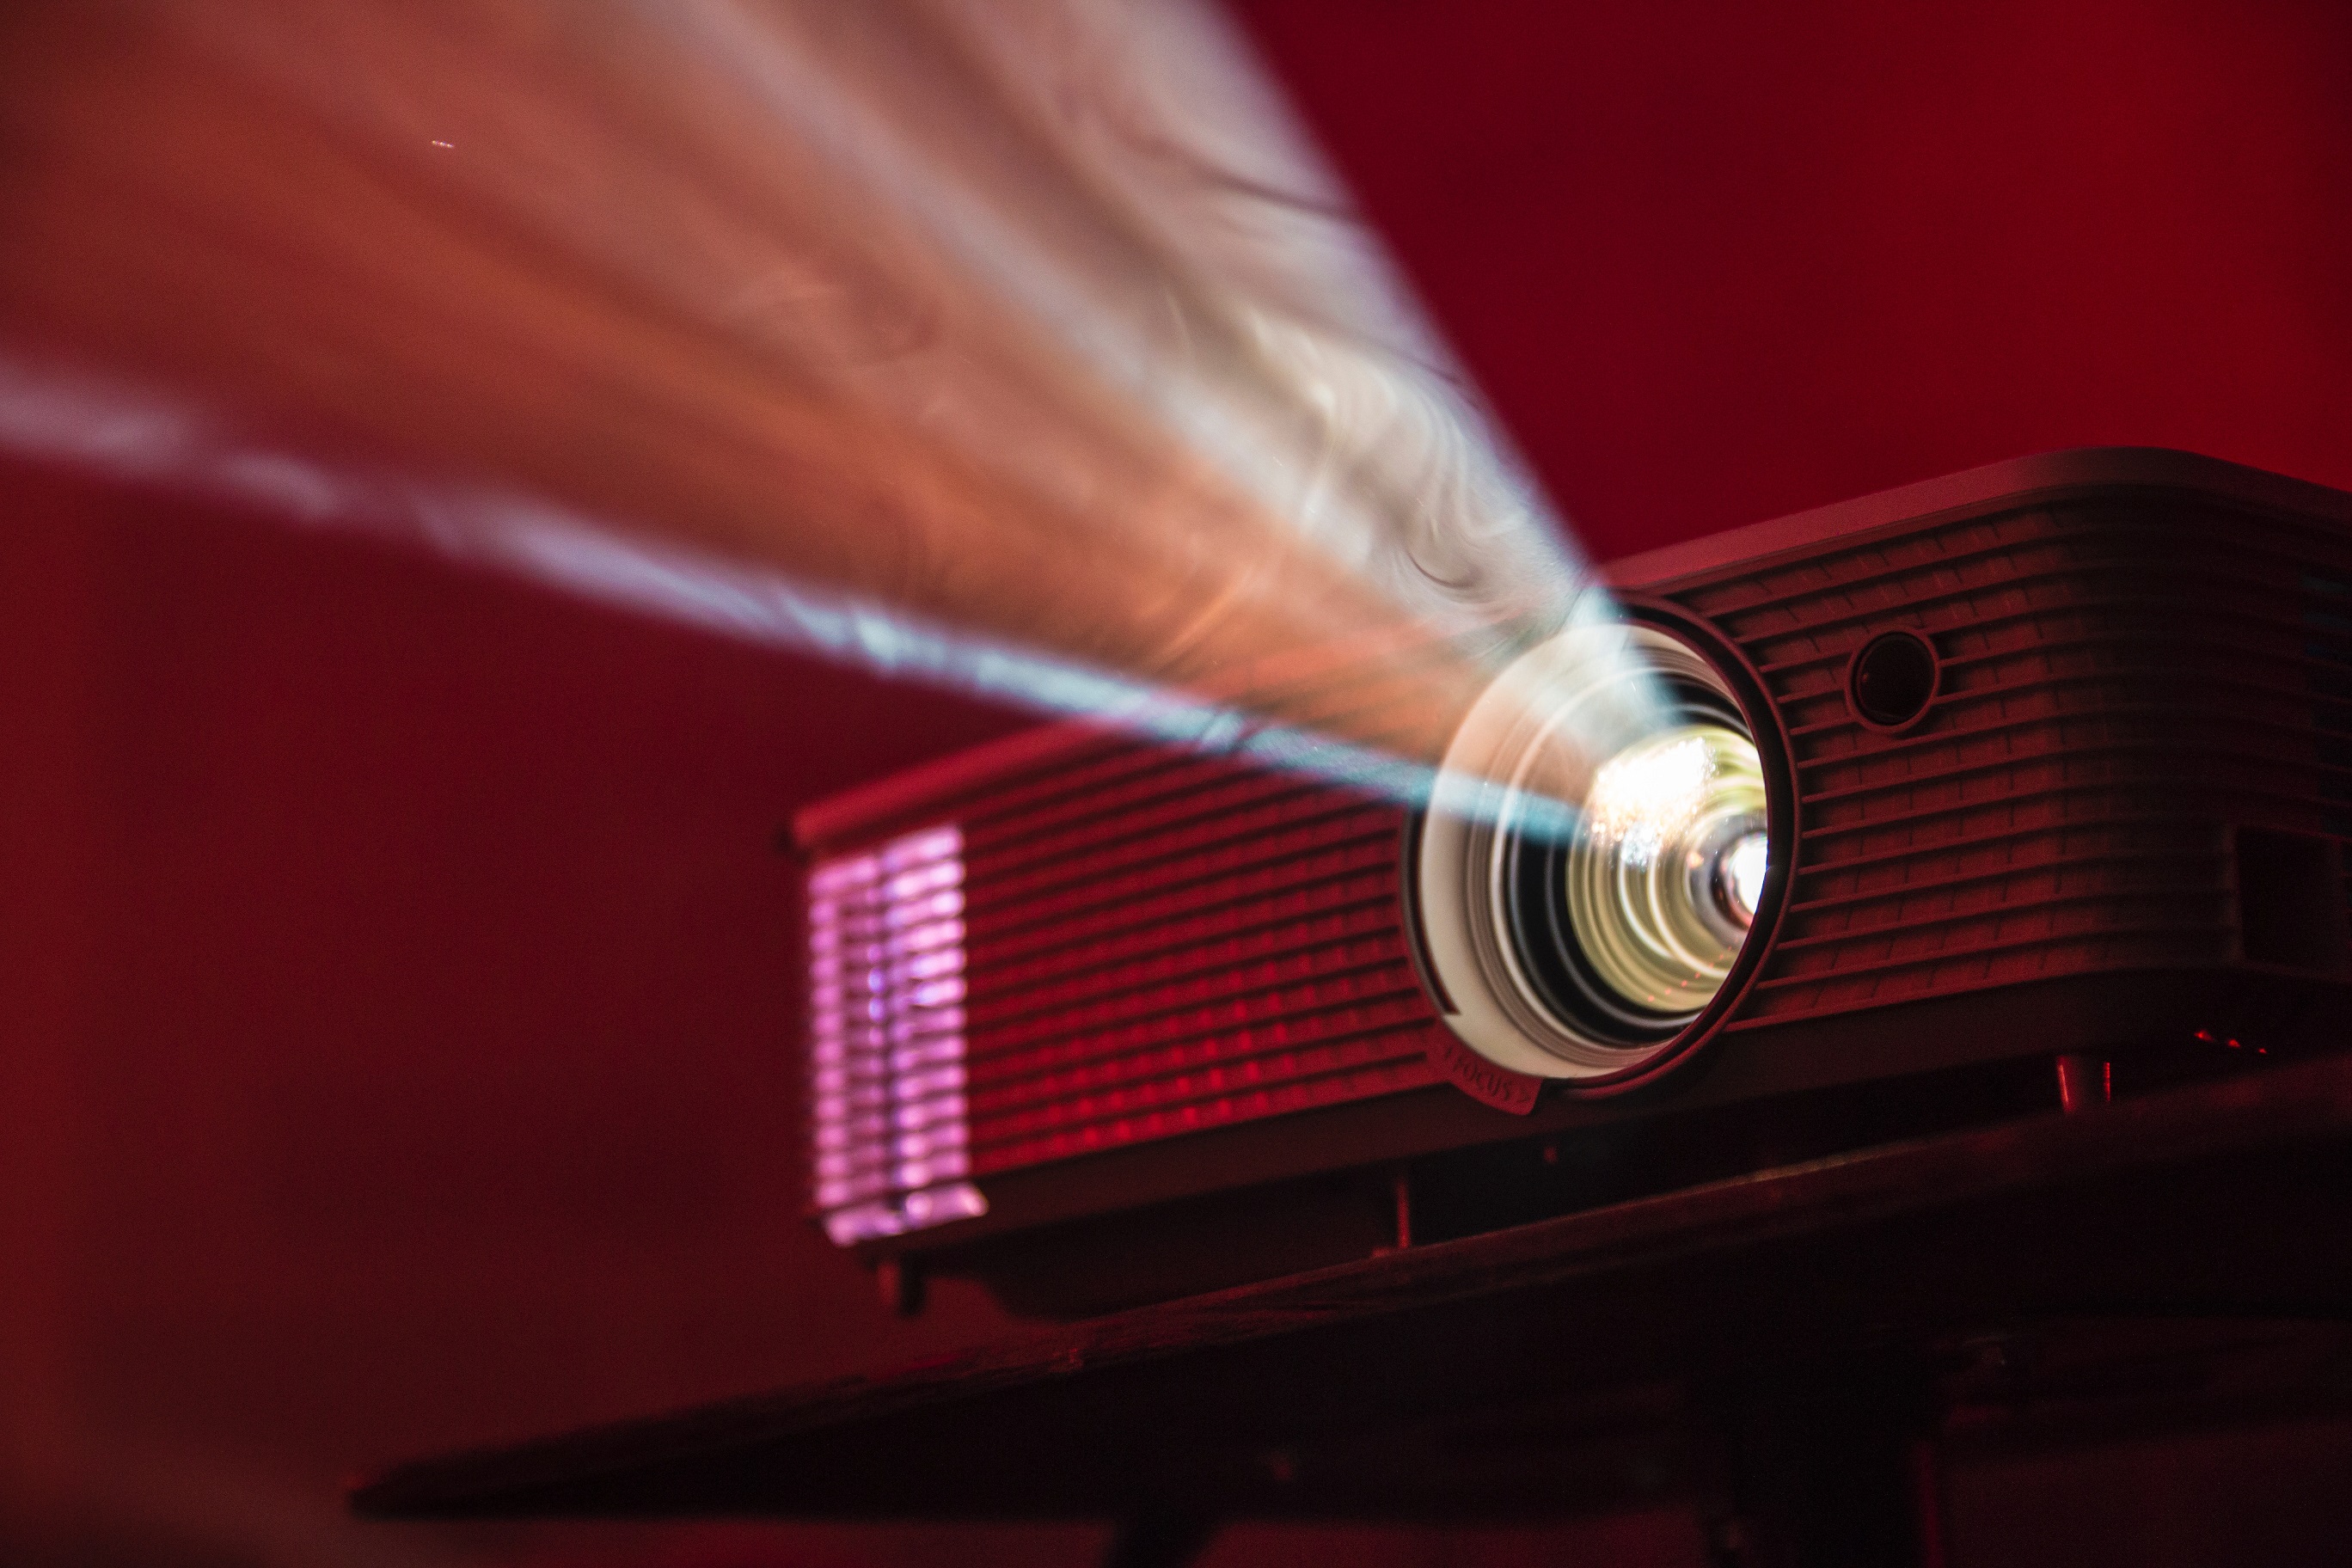 Home theatre projector